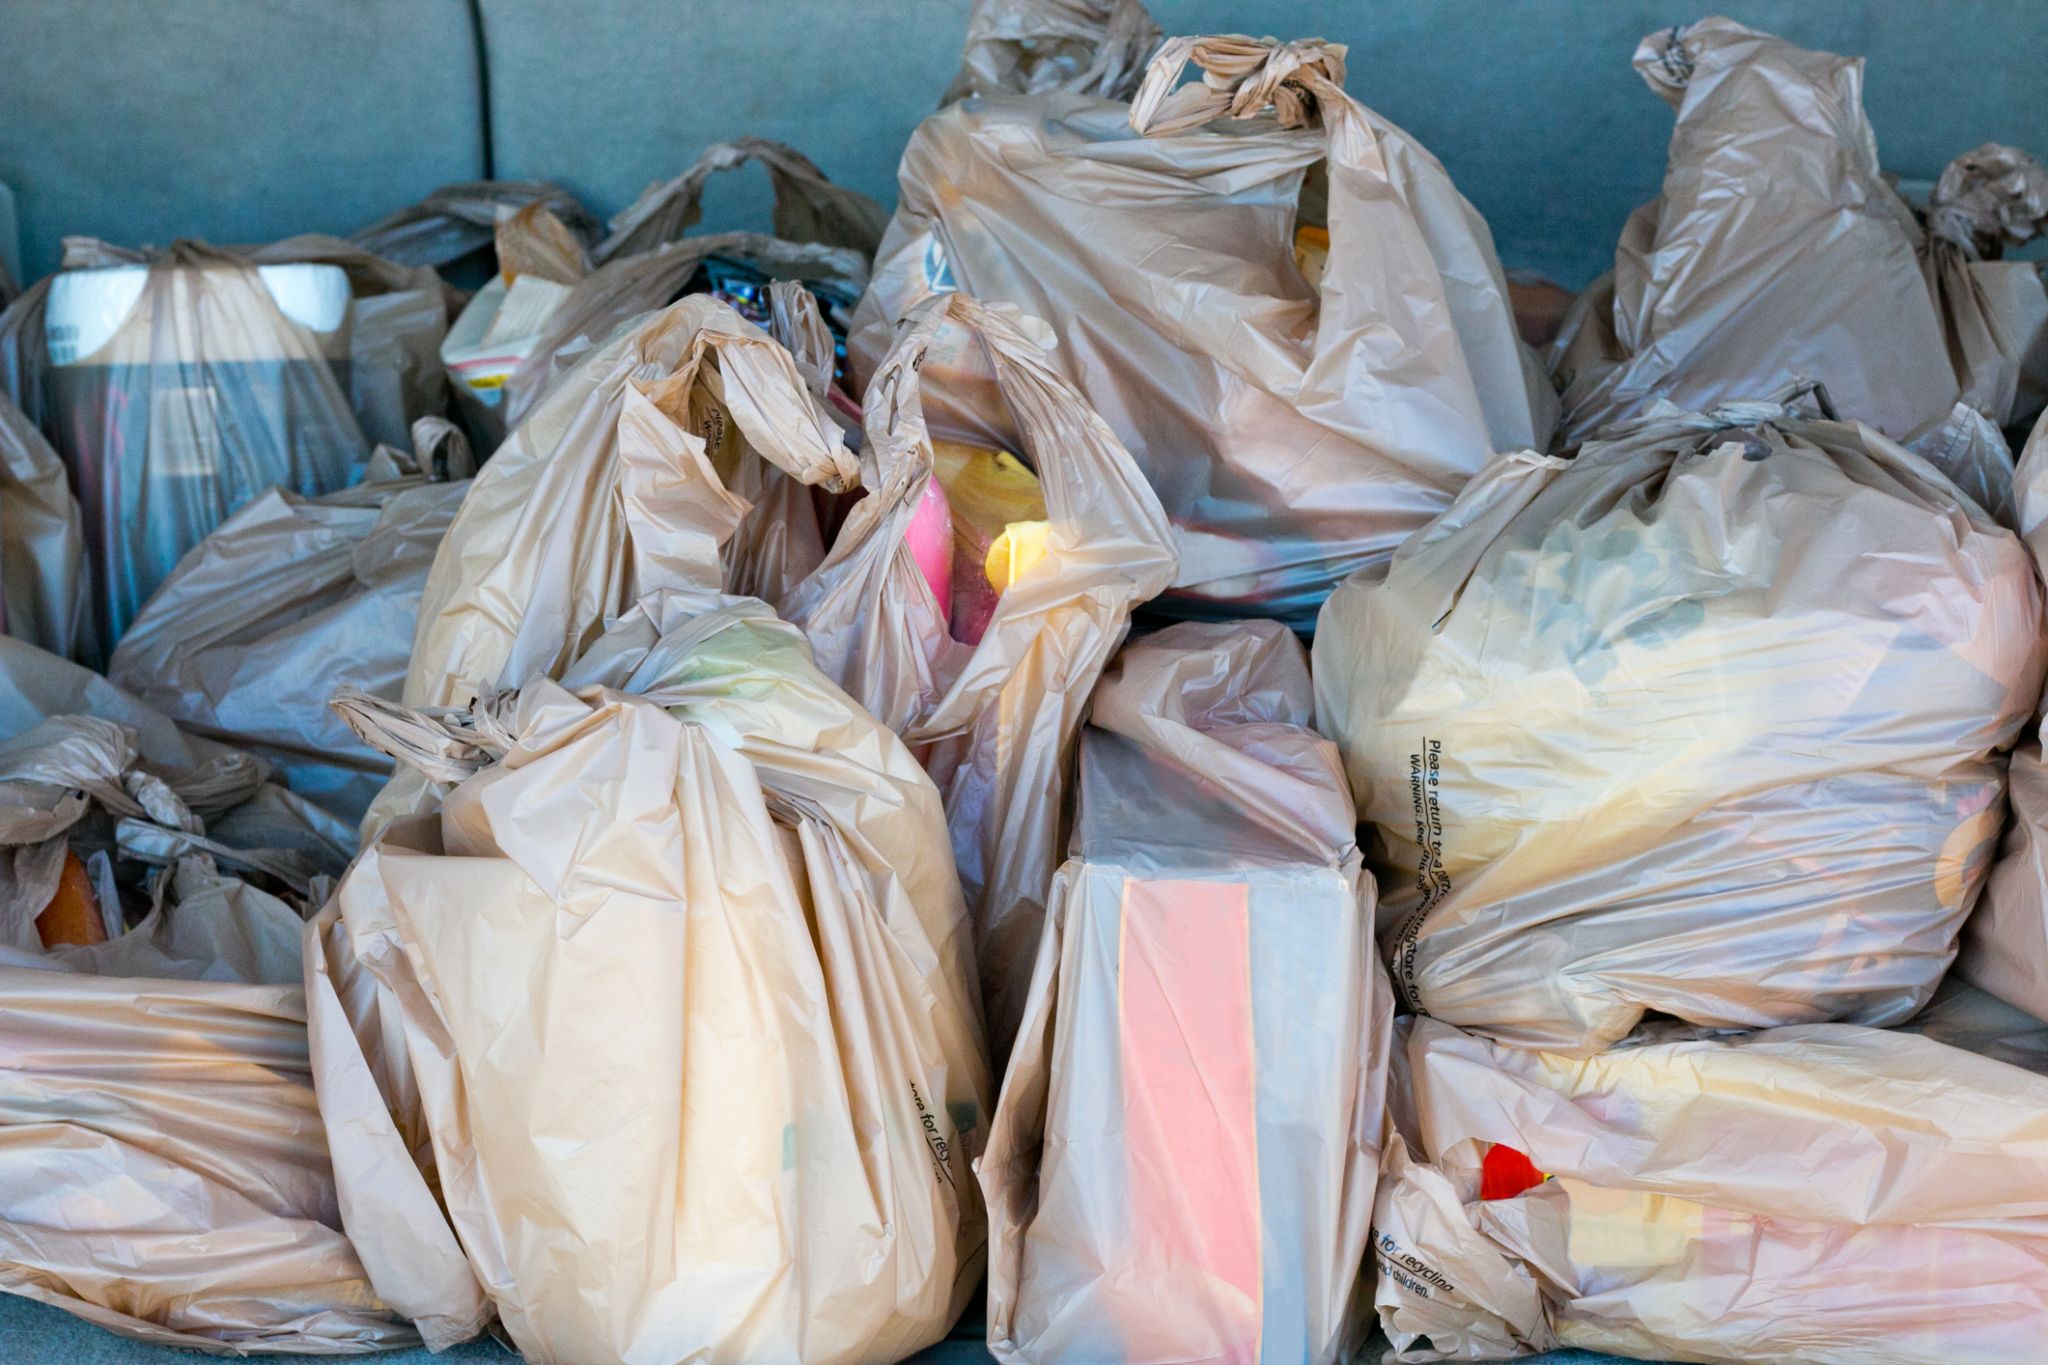 Washington's single-use plastic bag ban to go into effect Oct. 1. Here's what you need to know